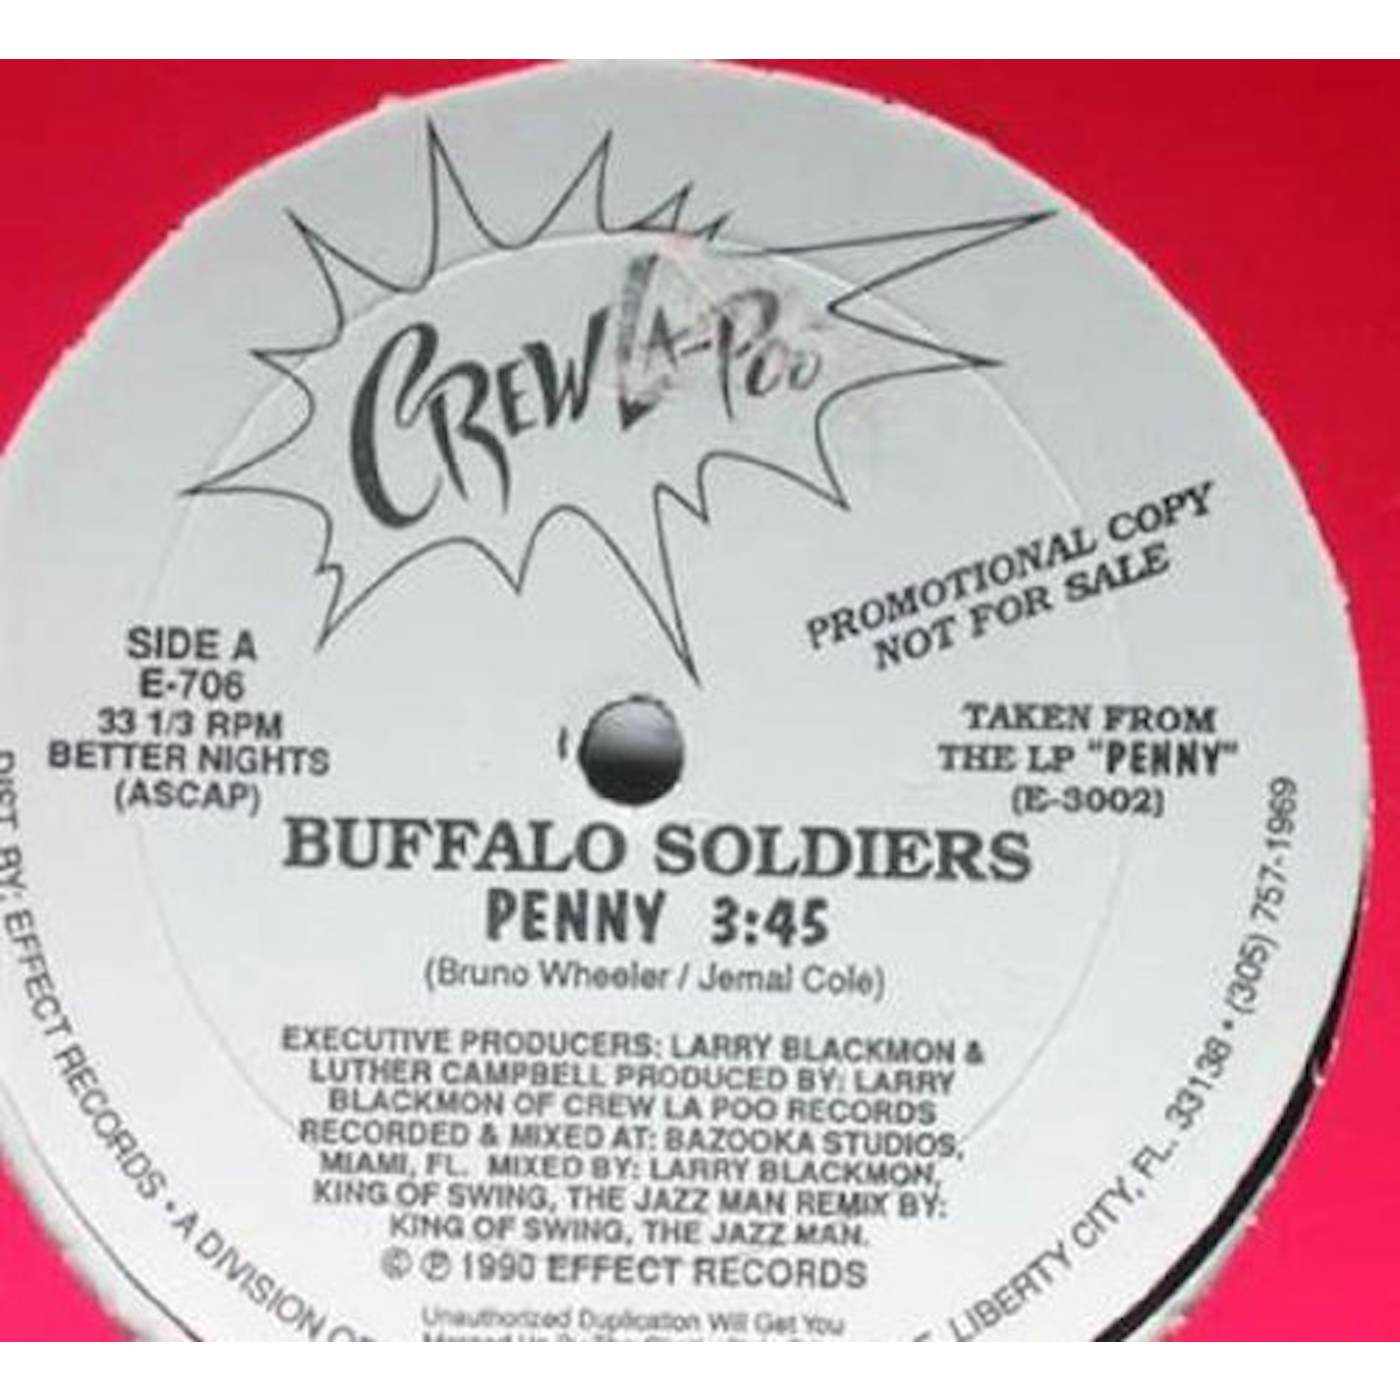 Buffalo Soldiers PENNY Vinyl Record